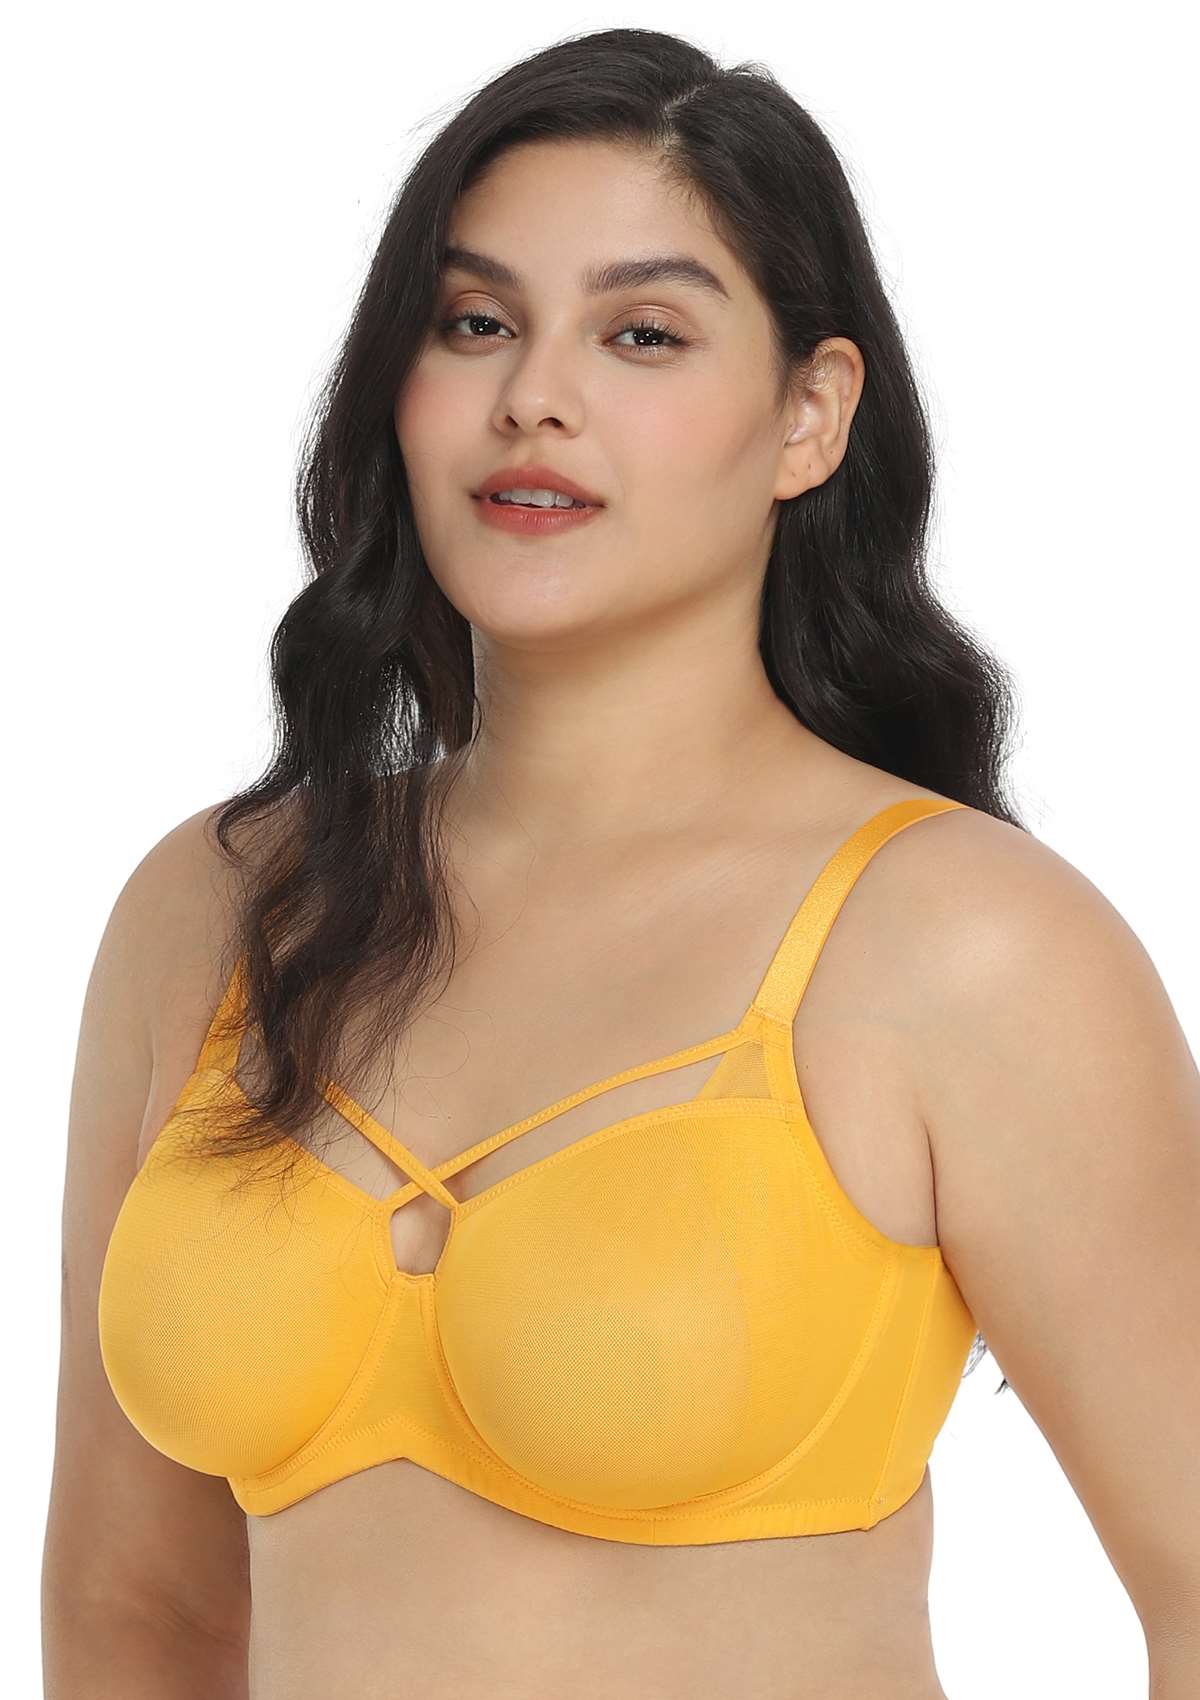 HSIA Billie Cross Front Strap Smooth Sheer Mesh Comfy Underwire Bra - Yellow / 34 / D